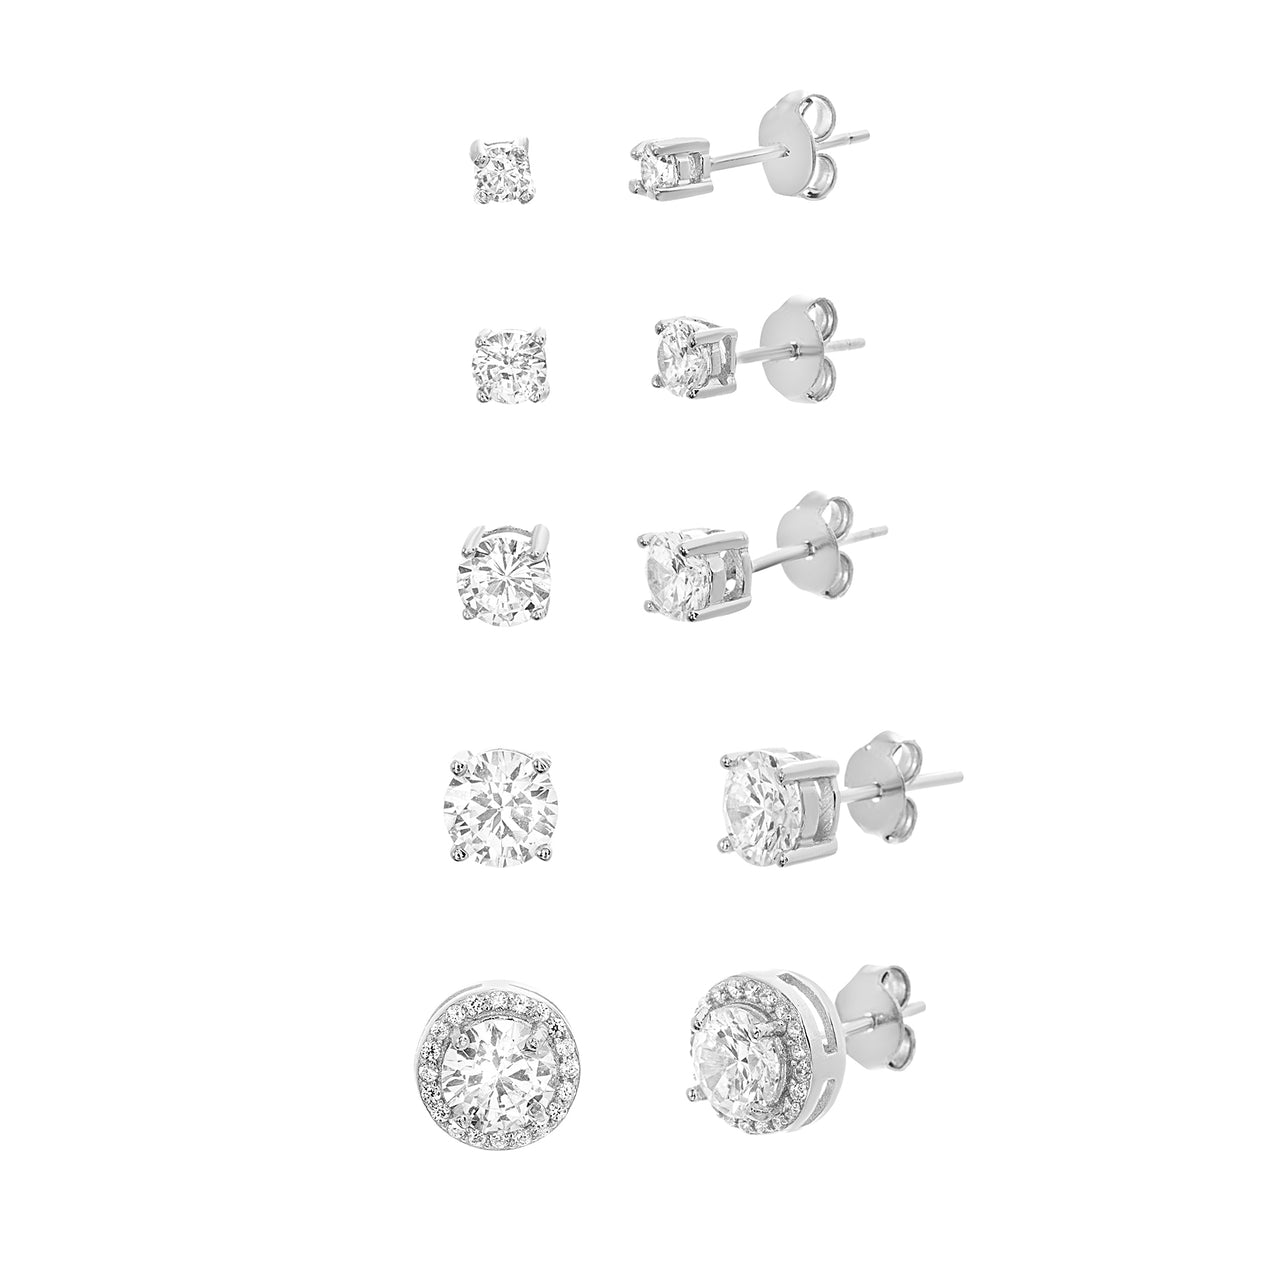 Lesa Michele Round 5 Piece Stud Earring Set with Cubic Zirconia in Sterling Silver